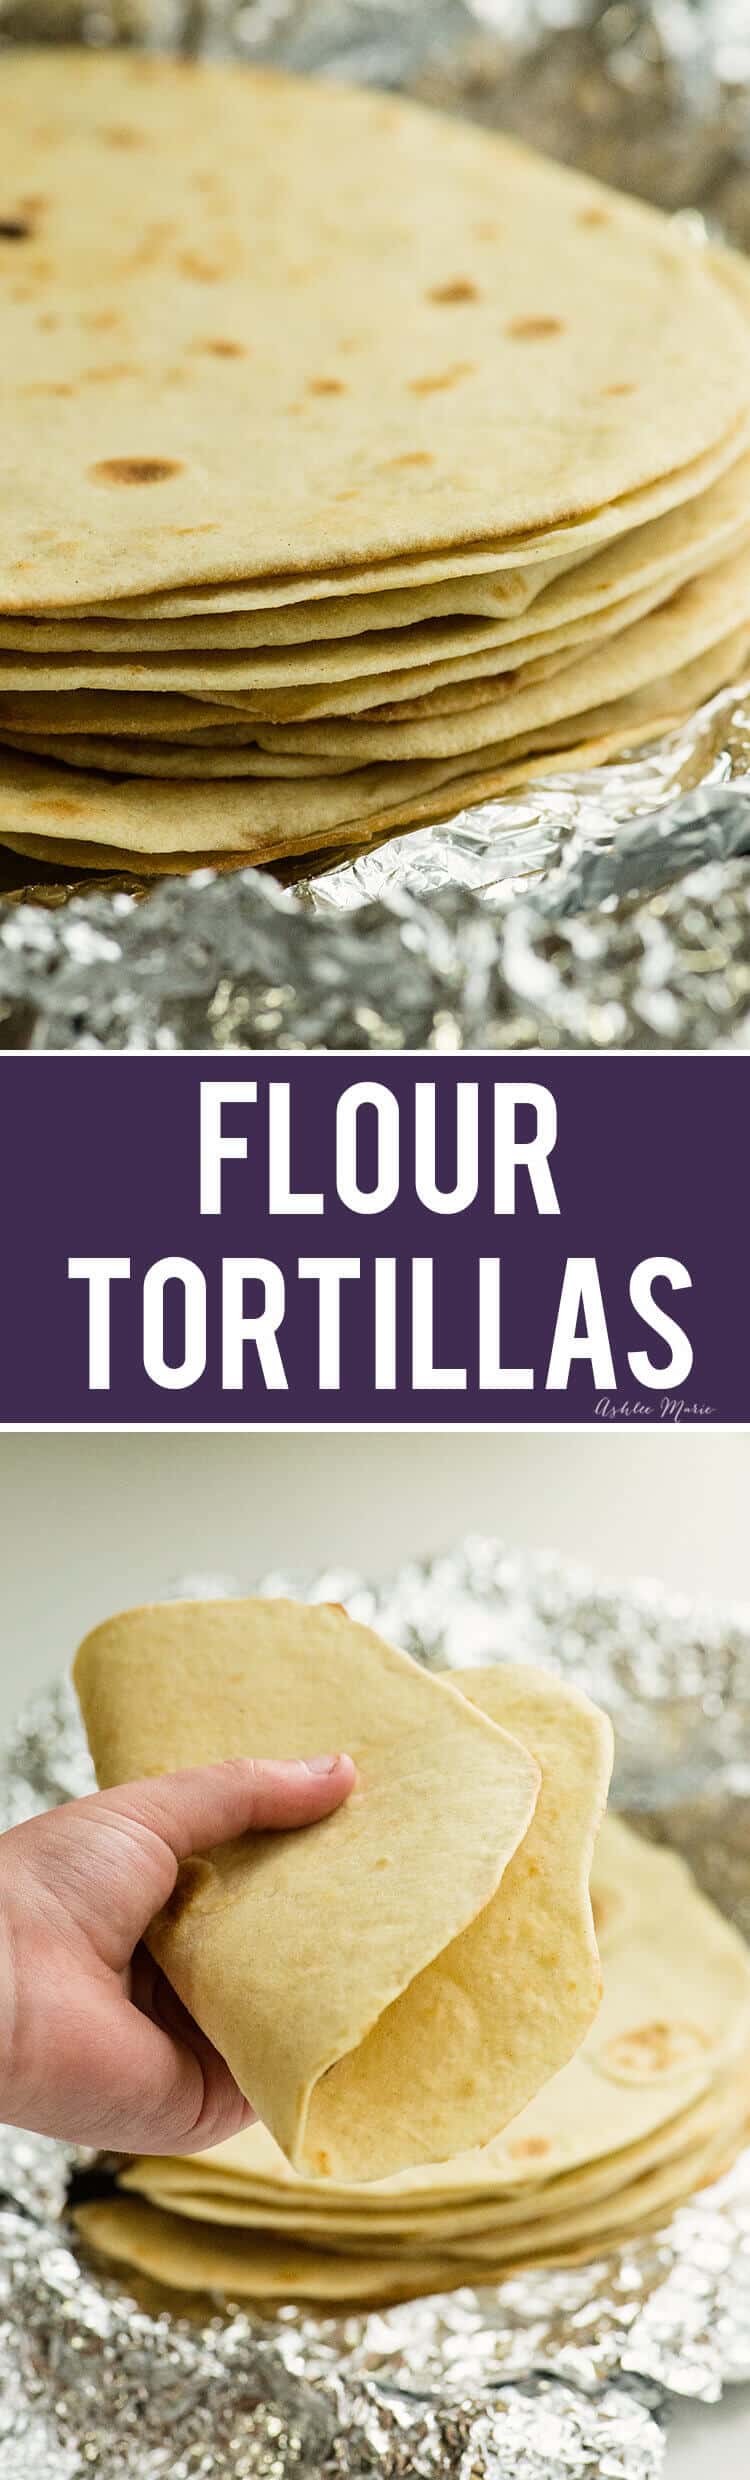 these homemade flour tortillas are easy to make and delicious - video tutorial